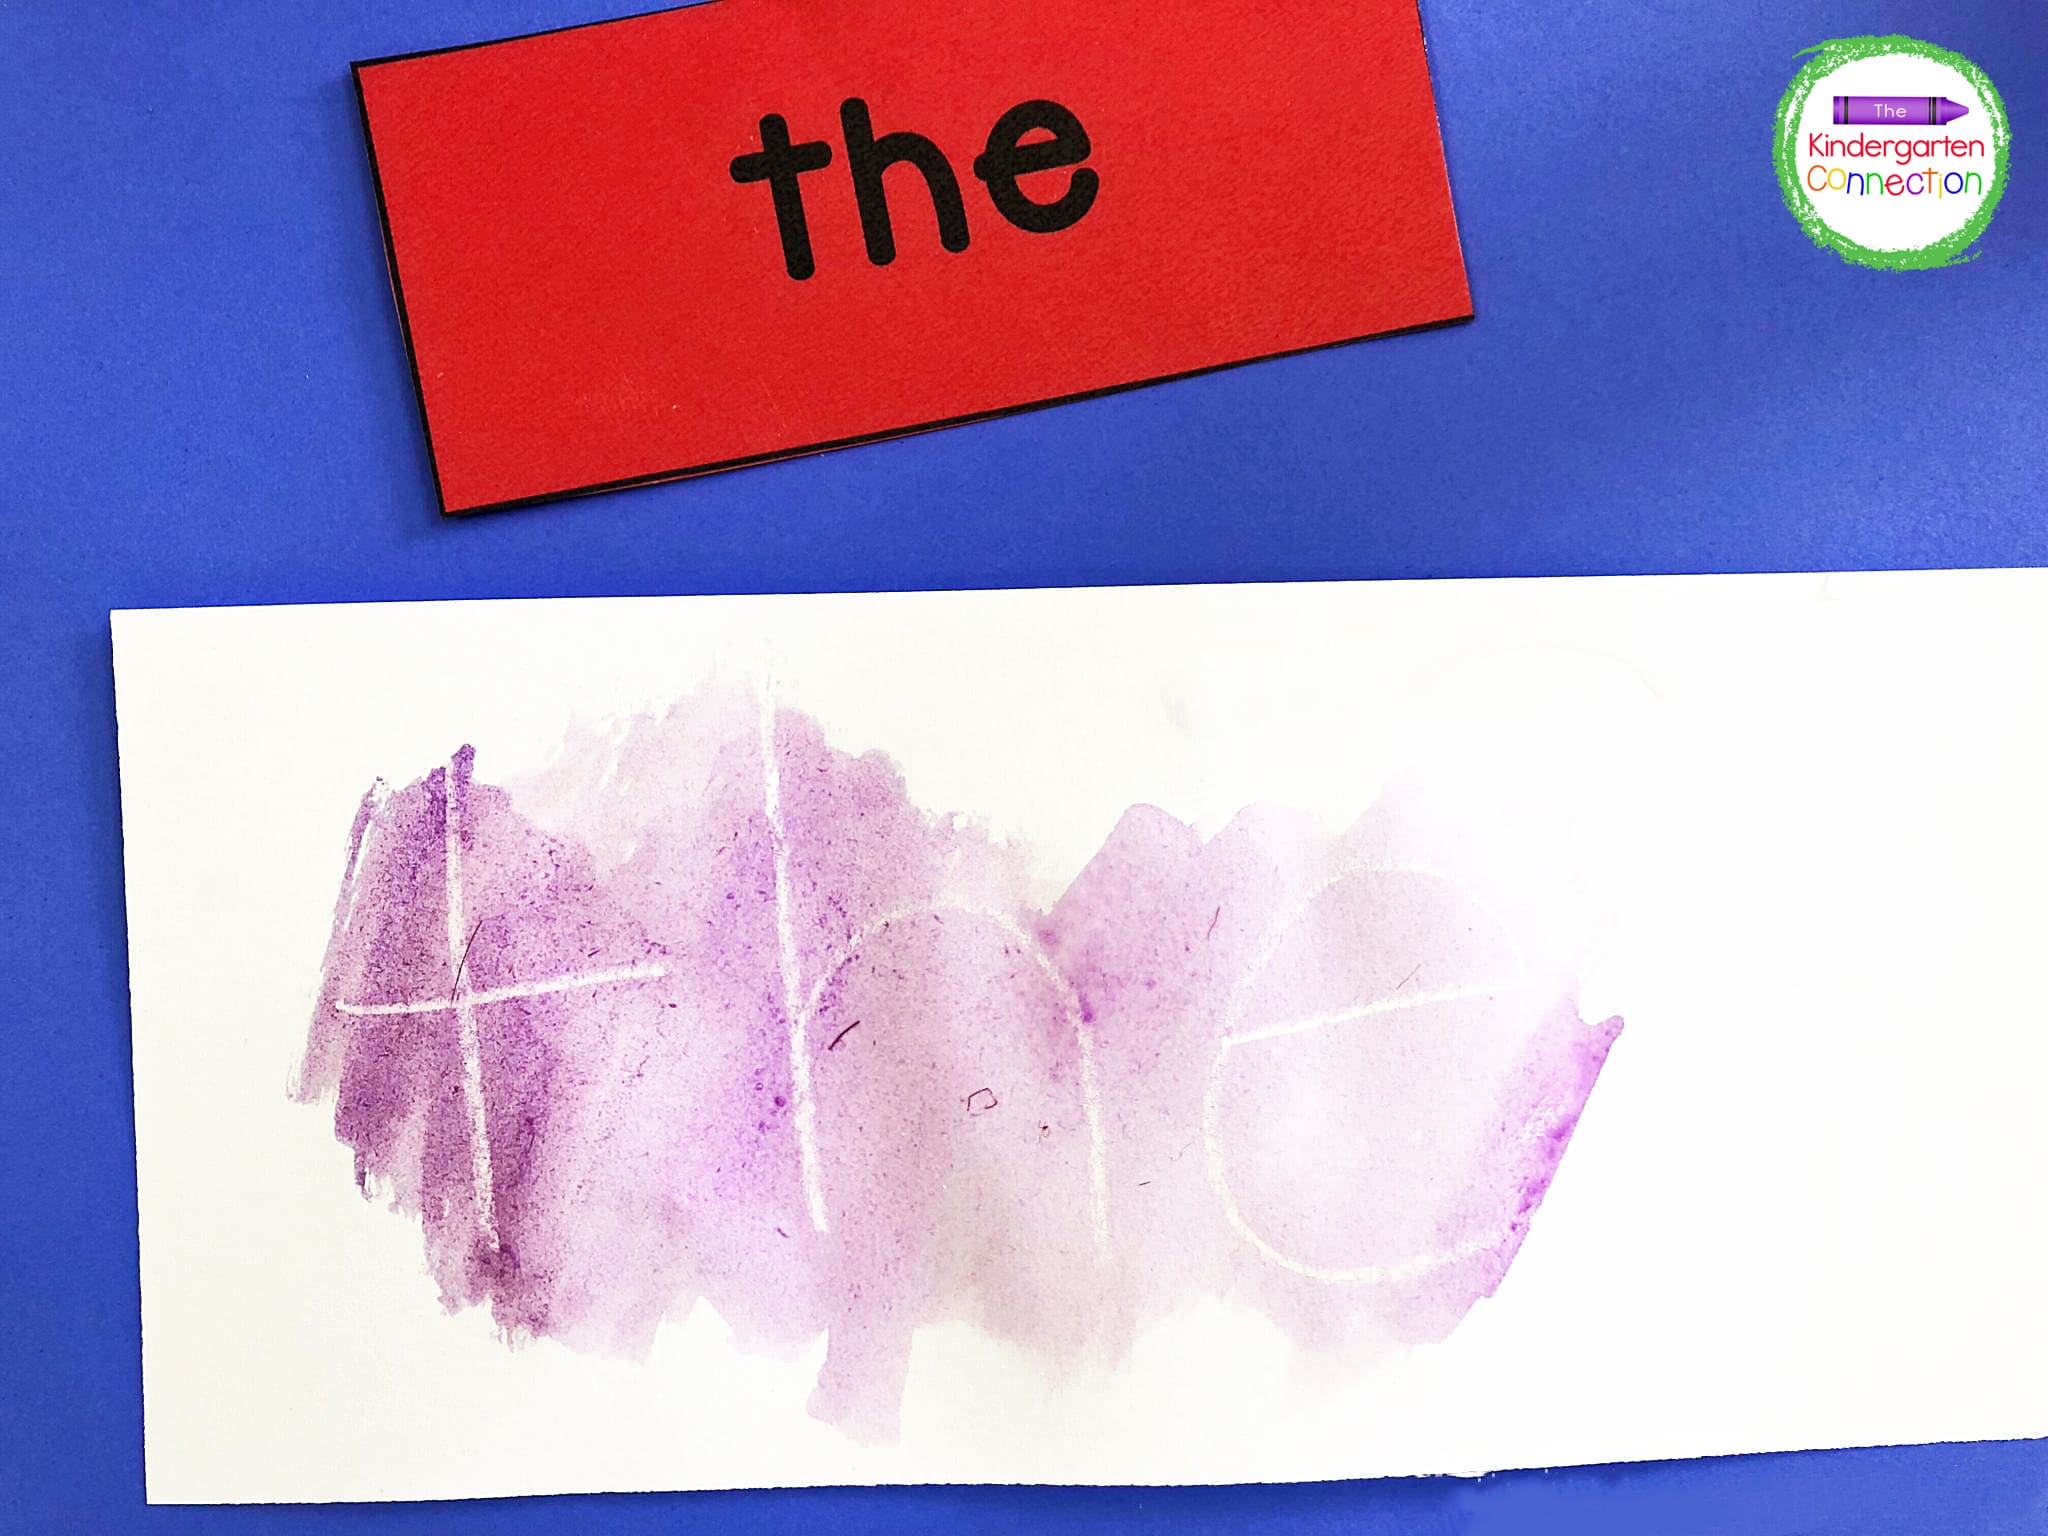 For all of these activities, I like to provide sight word flashcards for the students to refer to.